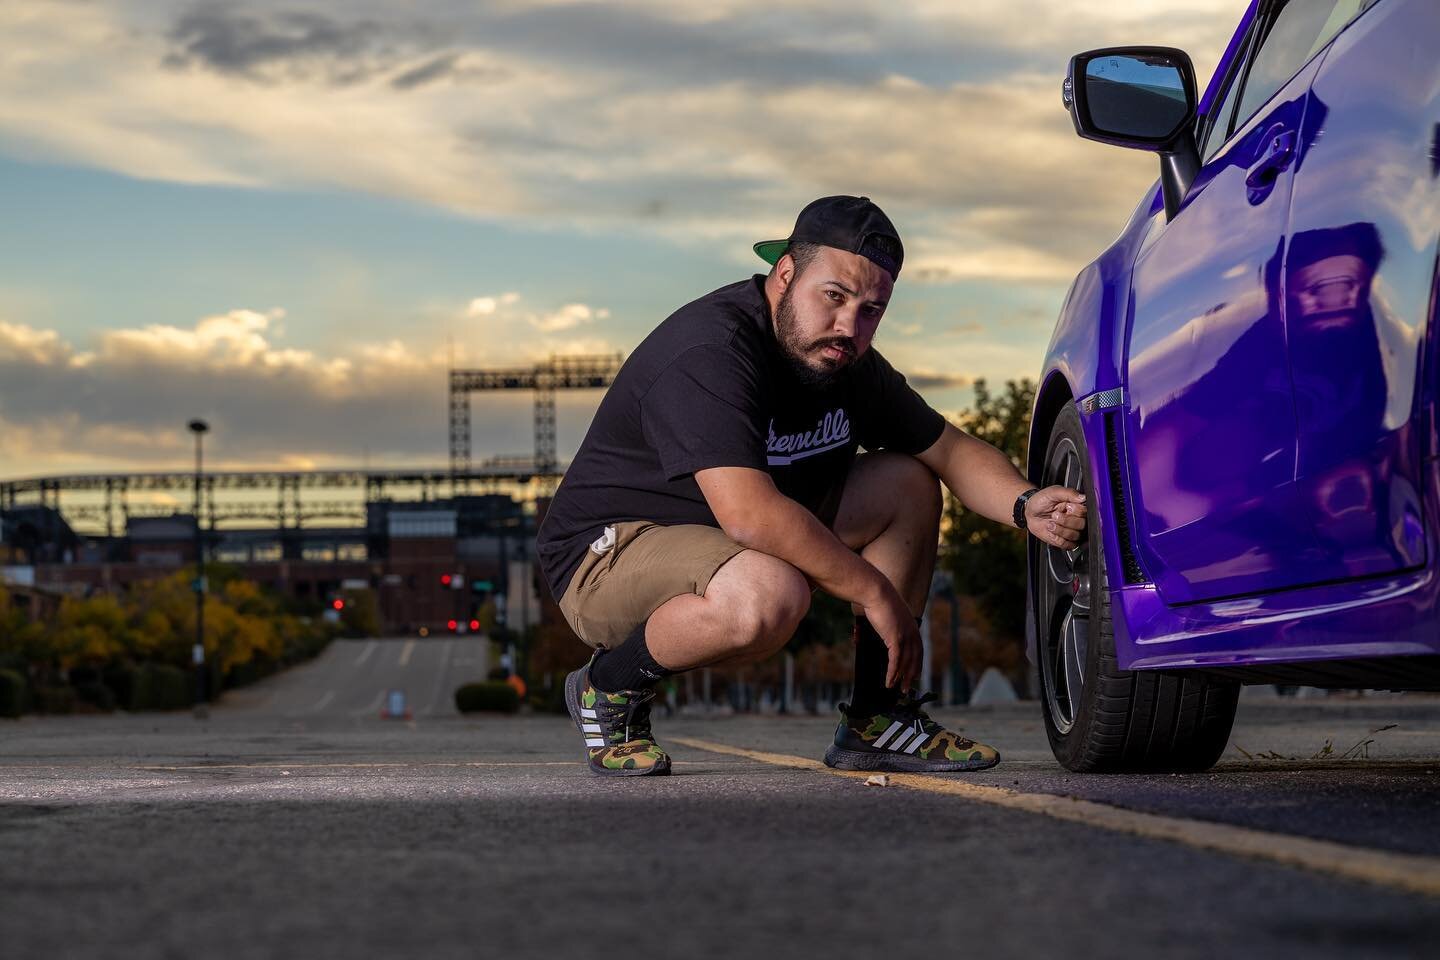 I find myself getting a lot more comfortable on both sides of the camera! Just a quick little photo op last week!
.
.
#subaru #subie #subigang #bape #adidas #dreamville #purple #purplecar #purple💜 #💜 #photography #photoshoot #coloradophotographer #